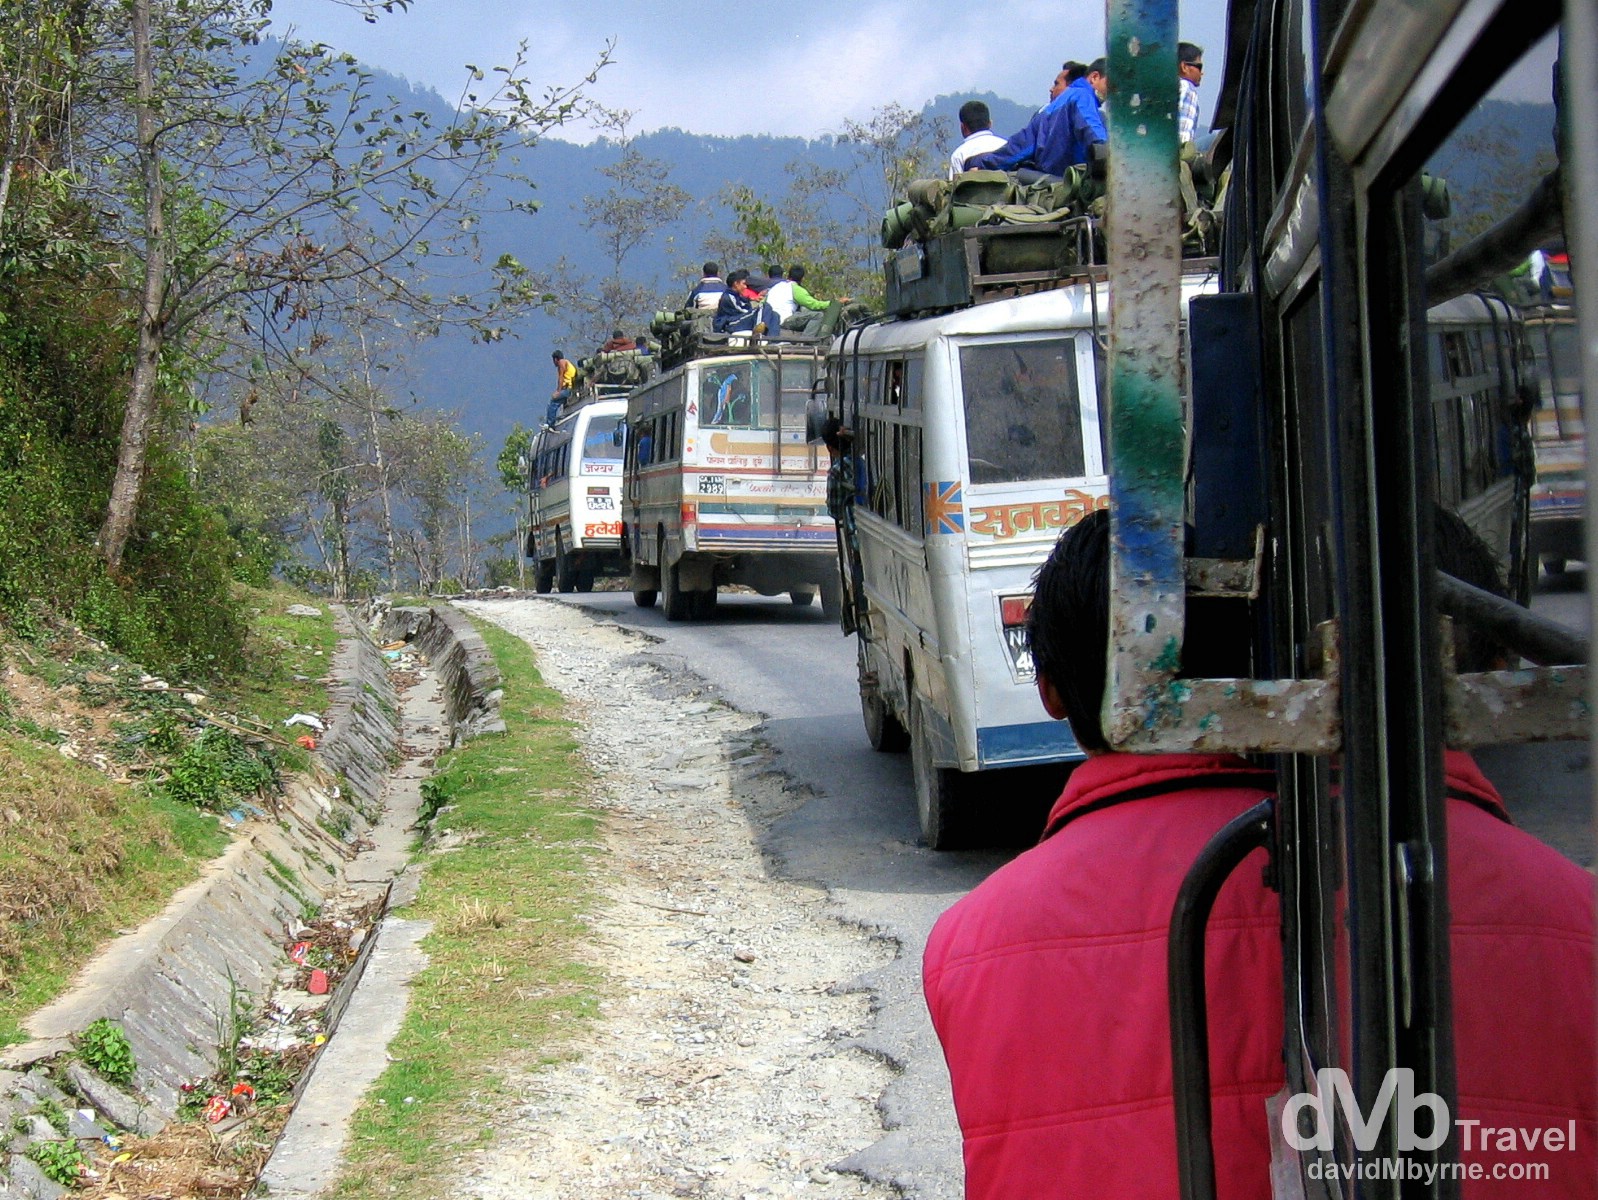 A bus convey in the Kathmandu Valley en route to Pokhara, Nepal. March 10th 2008.